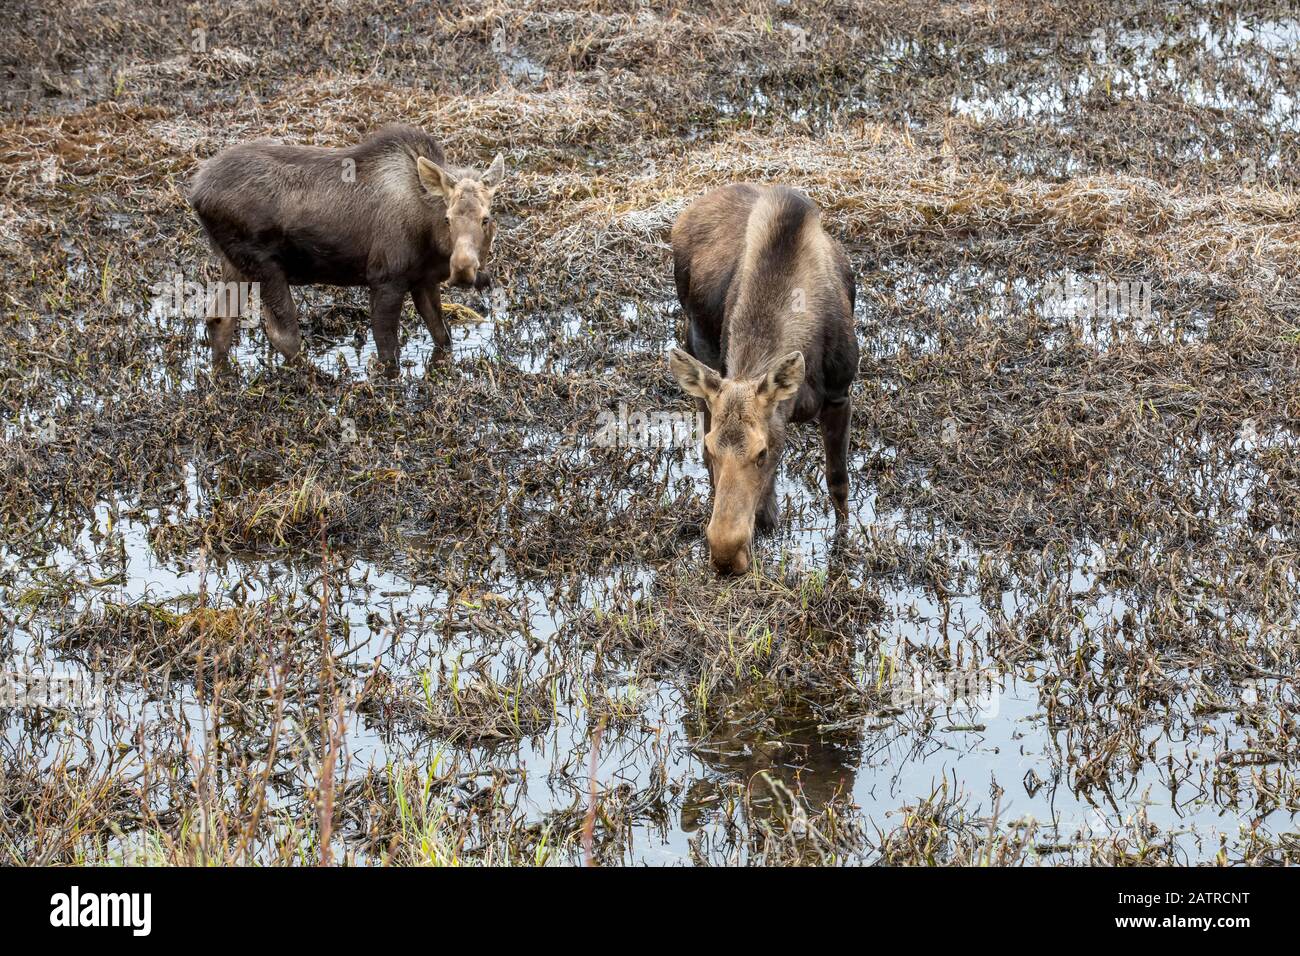 Two cow moose (Alces alces) walking in the shallow water of wetlands; Alaska, United States of America Stock Photo